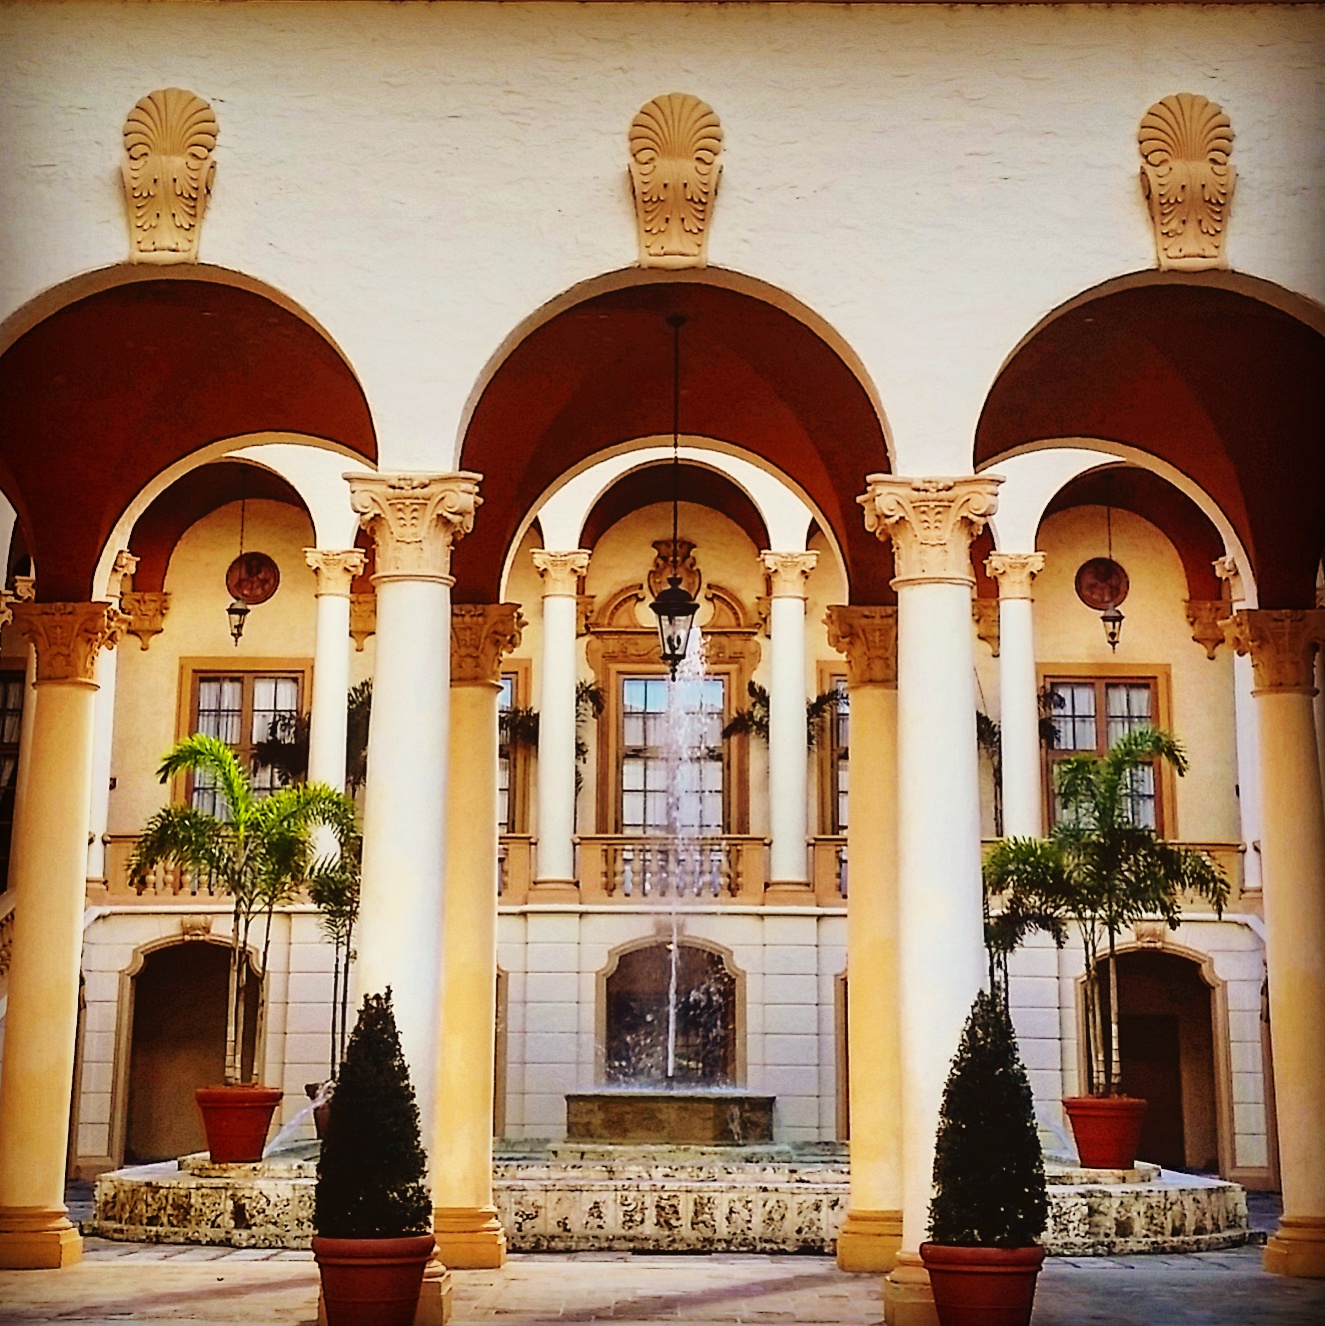 The Biltmore Spanish Courtyard is one of the most popular locations for engagement photos due to its romantic arches.